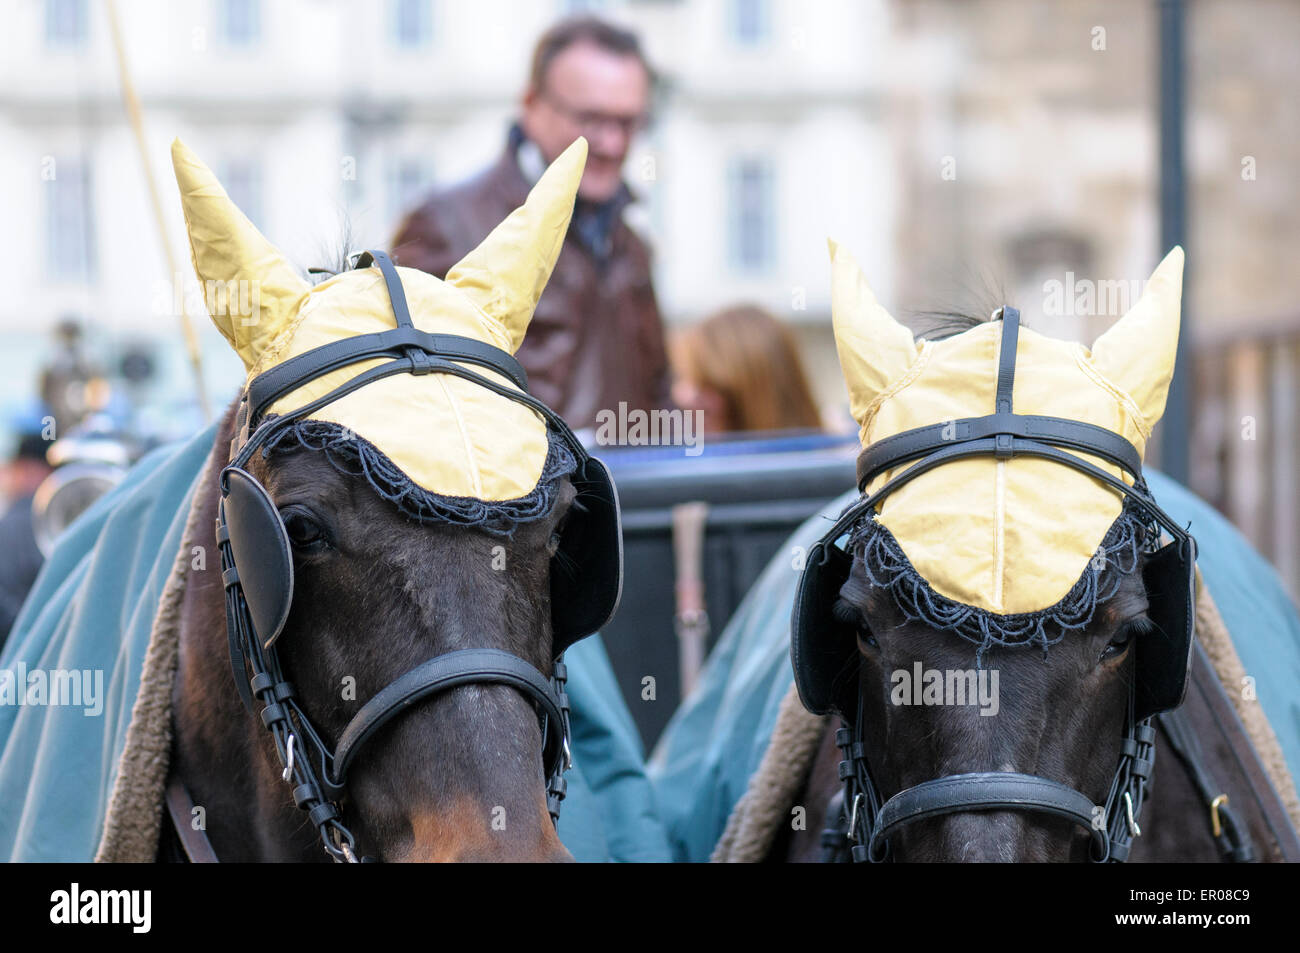 Ear covers adorn the horses used to transport tourists in a fiaker around the old city of Vienna, Austria. Stock Photo